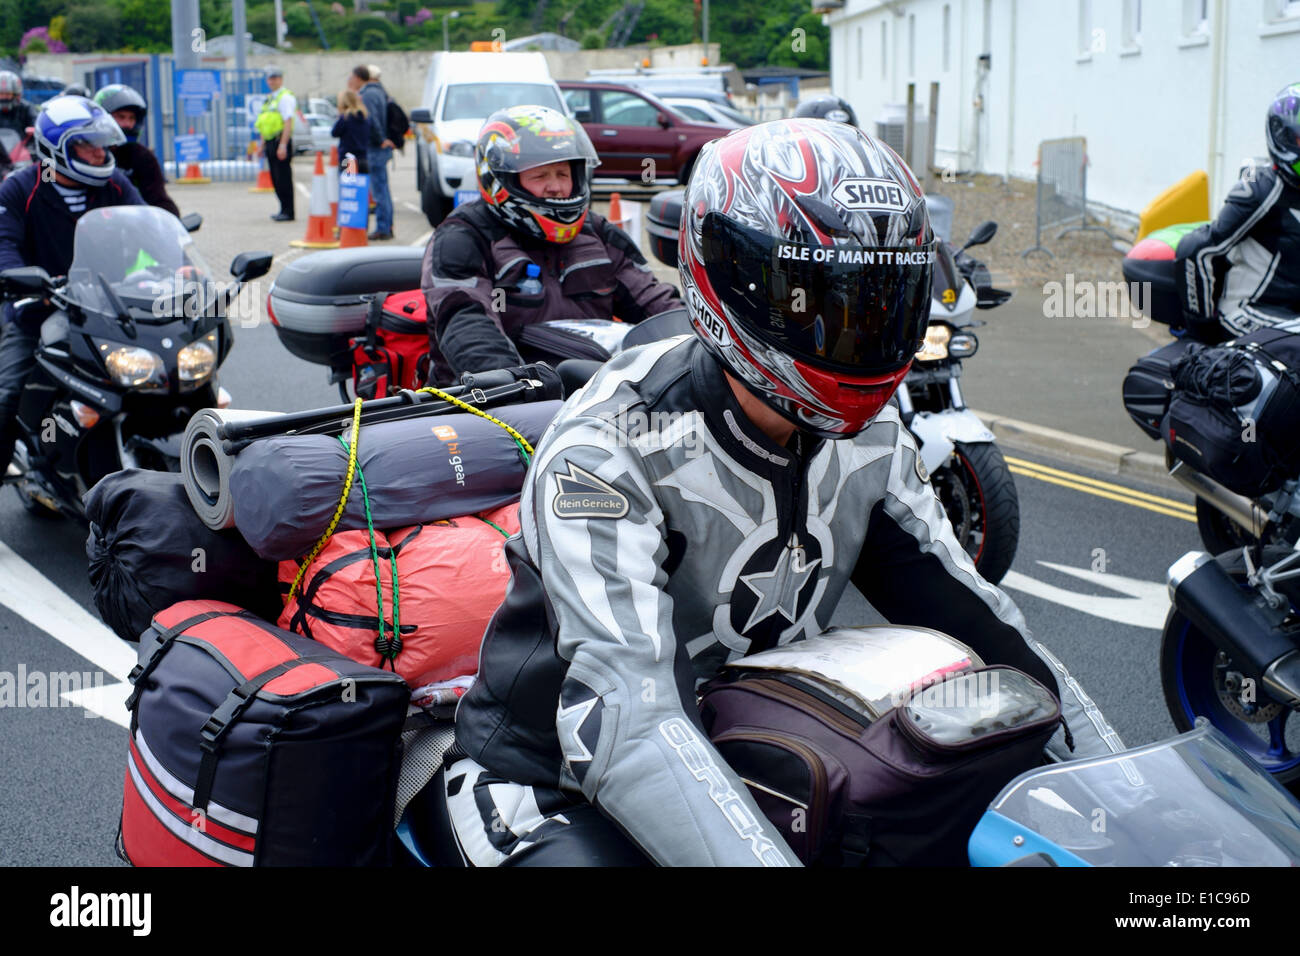 Douglas, Isle of Man. 30th May, 2014. Motorcycling enthusiasts arriving for the 2014 TT. The festival comprises a week of qualifying events followed by a week of racing on closed public roads. Credit:  Daisy Corlett/Alamy Live News Stock Photo